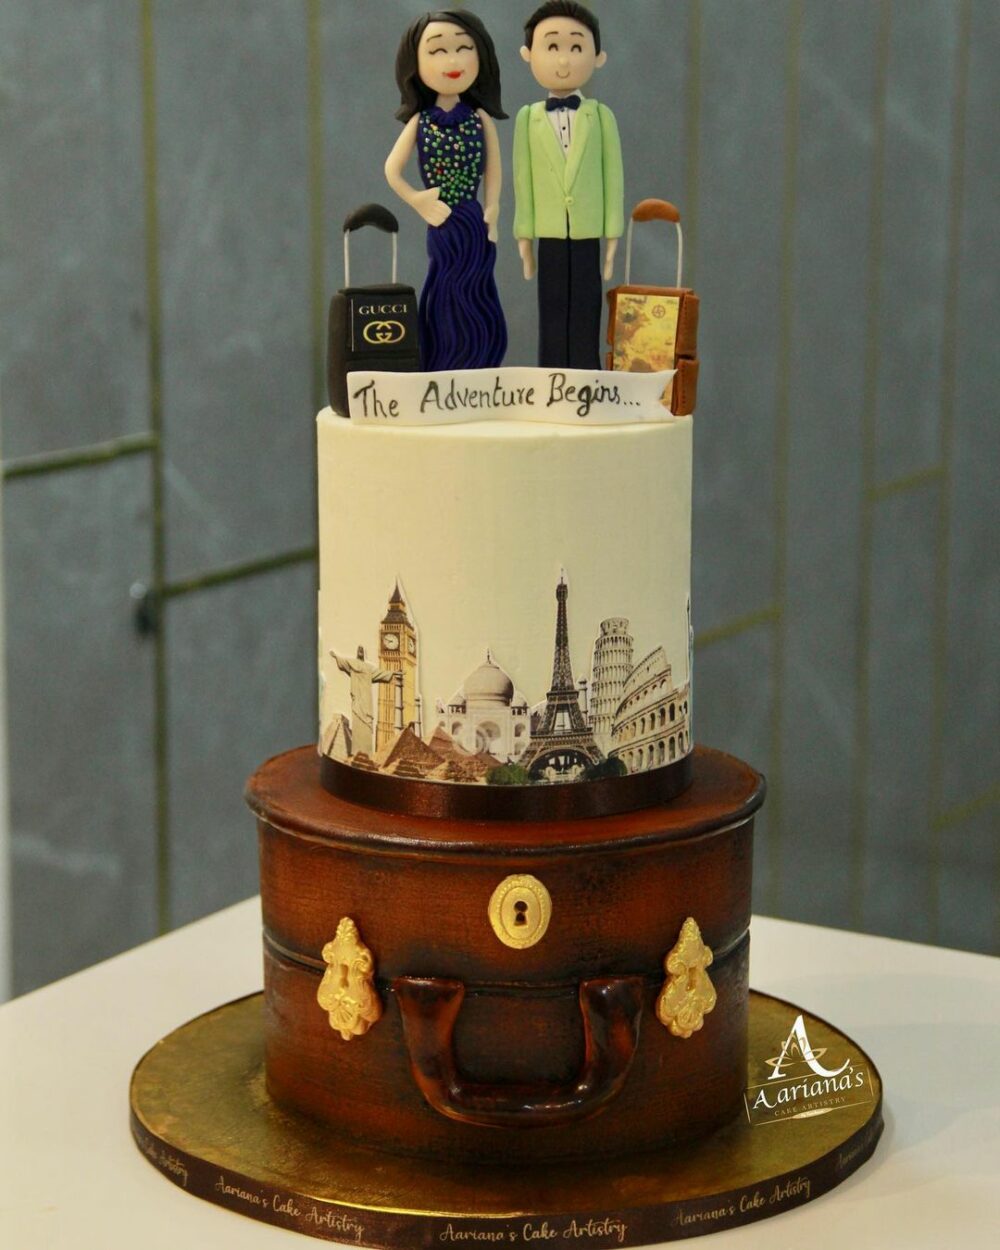 If youre looking for a travel cake to enjoy your trip look no further than this one